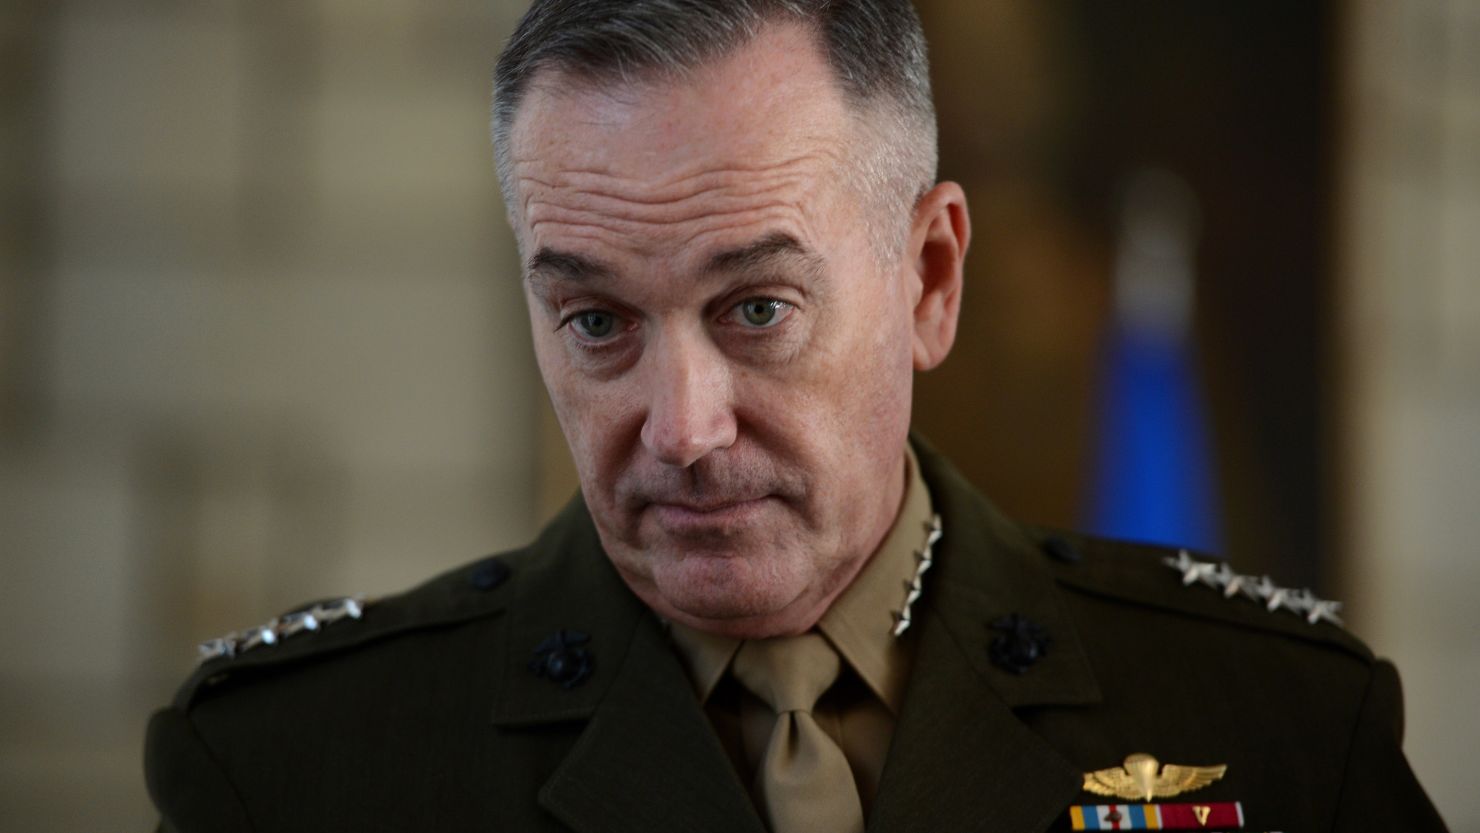 Gen. Joseph Dunford, commander of the International Security Assistance Force (ISAF) in Afghanistan, attends a joint press conference with NATO Secretary-General Anders Fogh Rasmussen and Afghan President Hamid Karzai in Kabul.